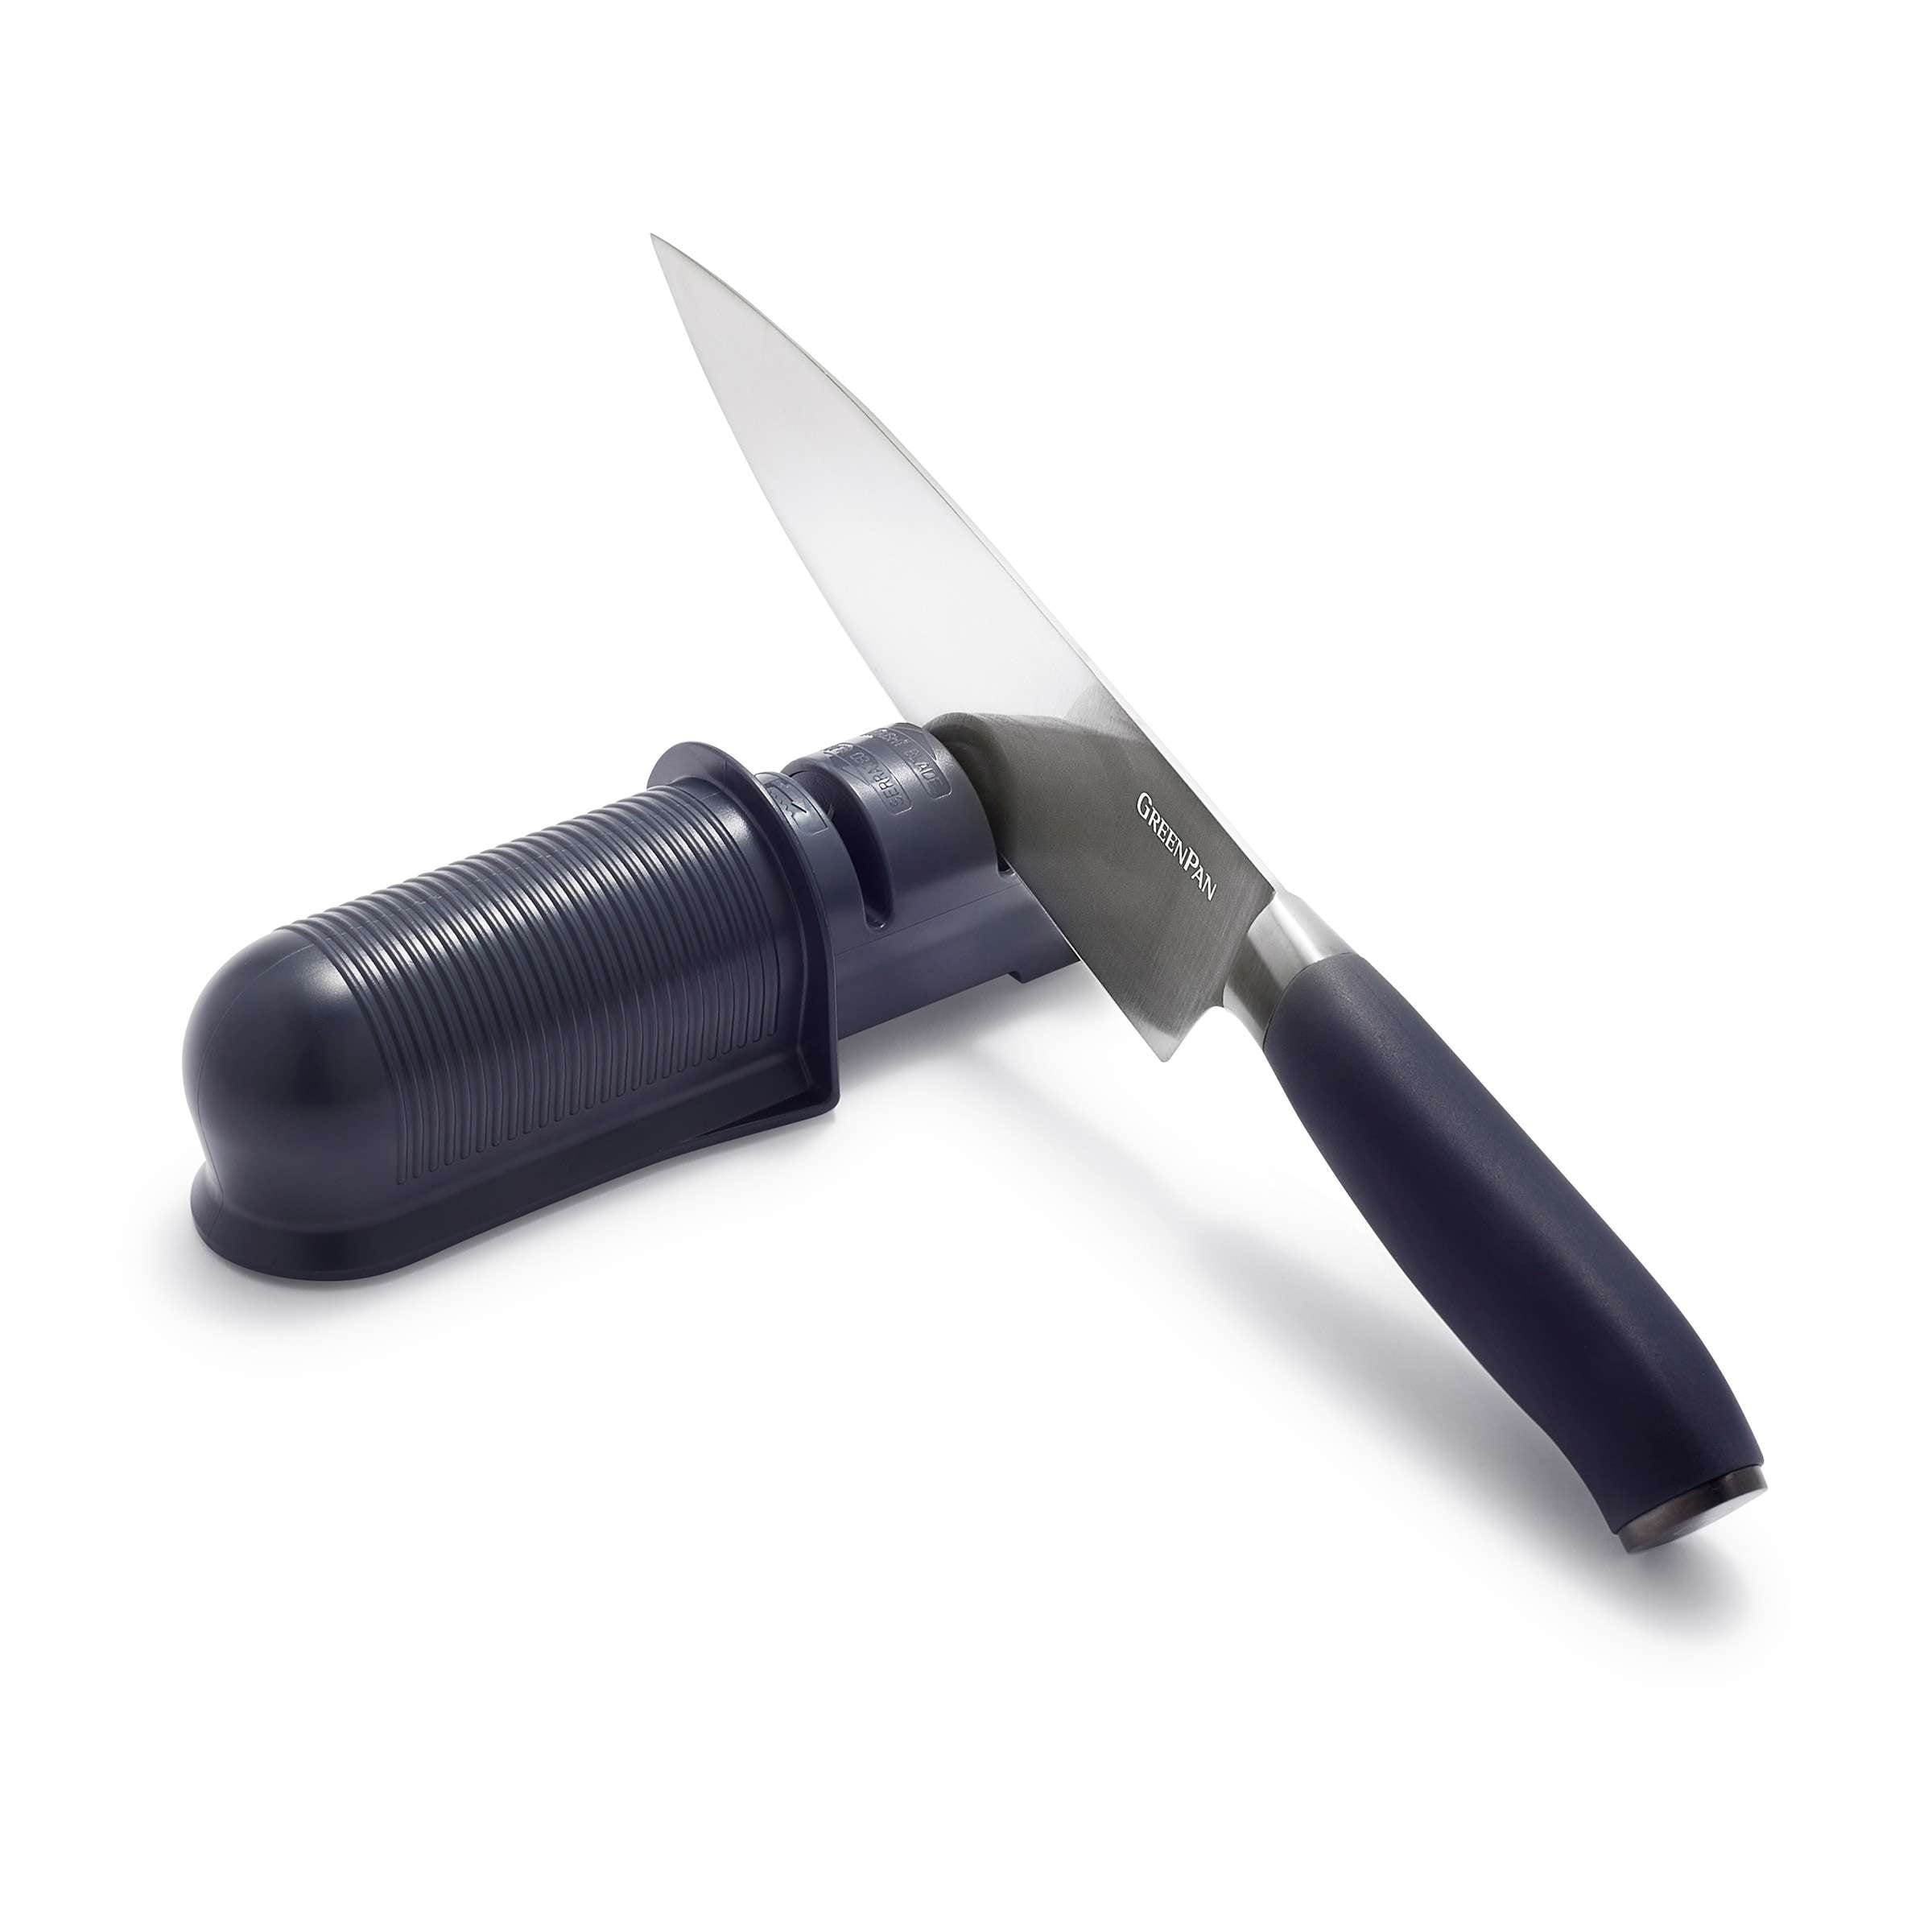 https://ak1.ostkcdn.com/images/products/is/images/direct/d6f0ab68255c9b129d6efca9fd2b77c6505b99b8/GreenPan-Titanium-Pull-Through-Knife-Sharpener.jpg